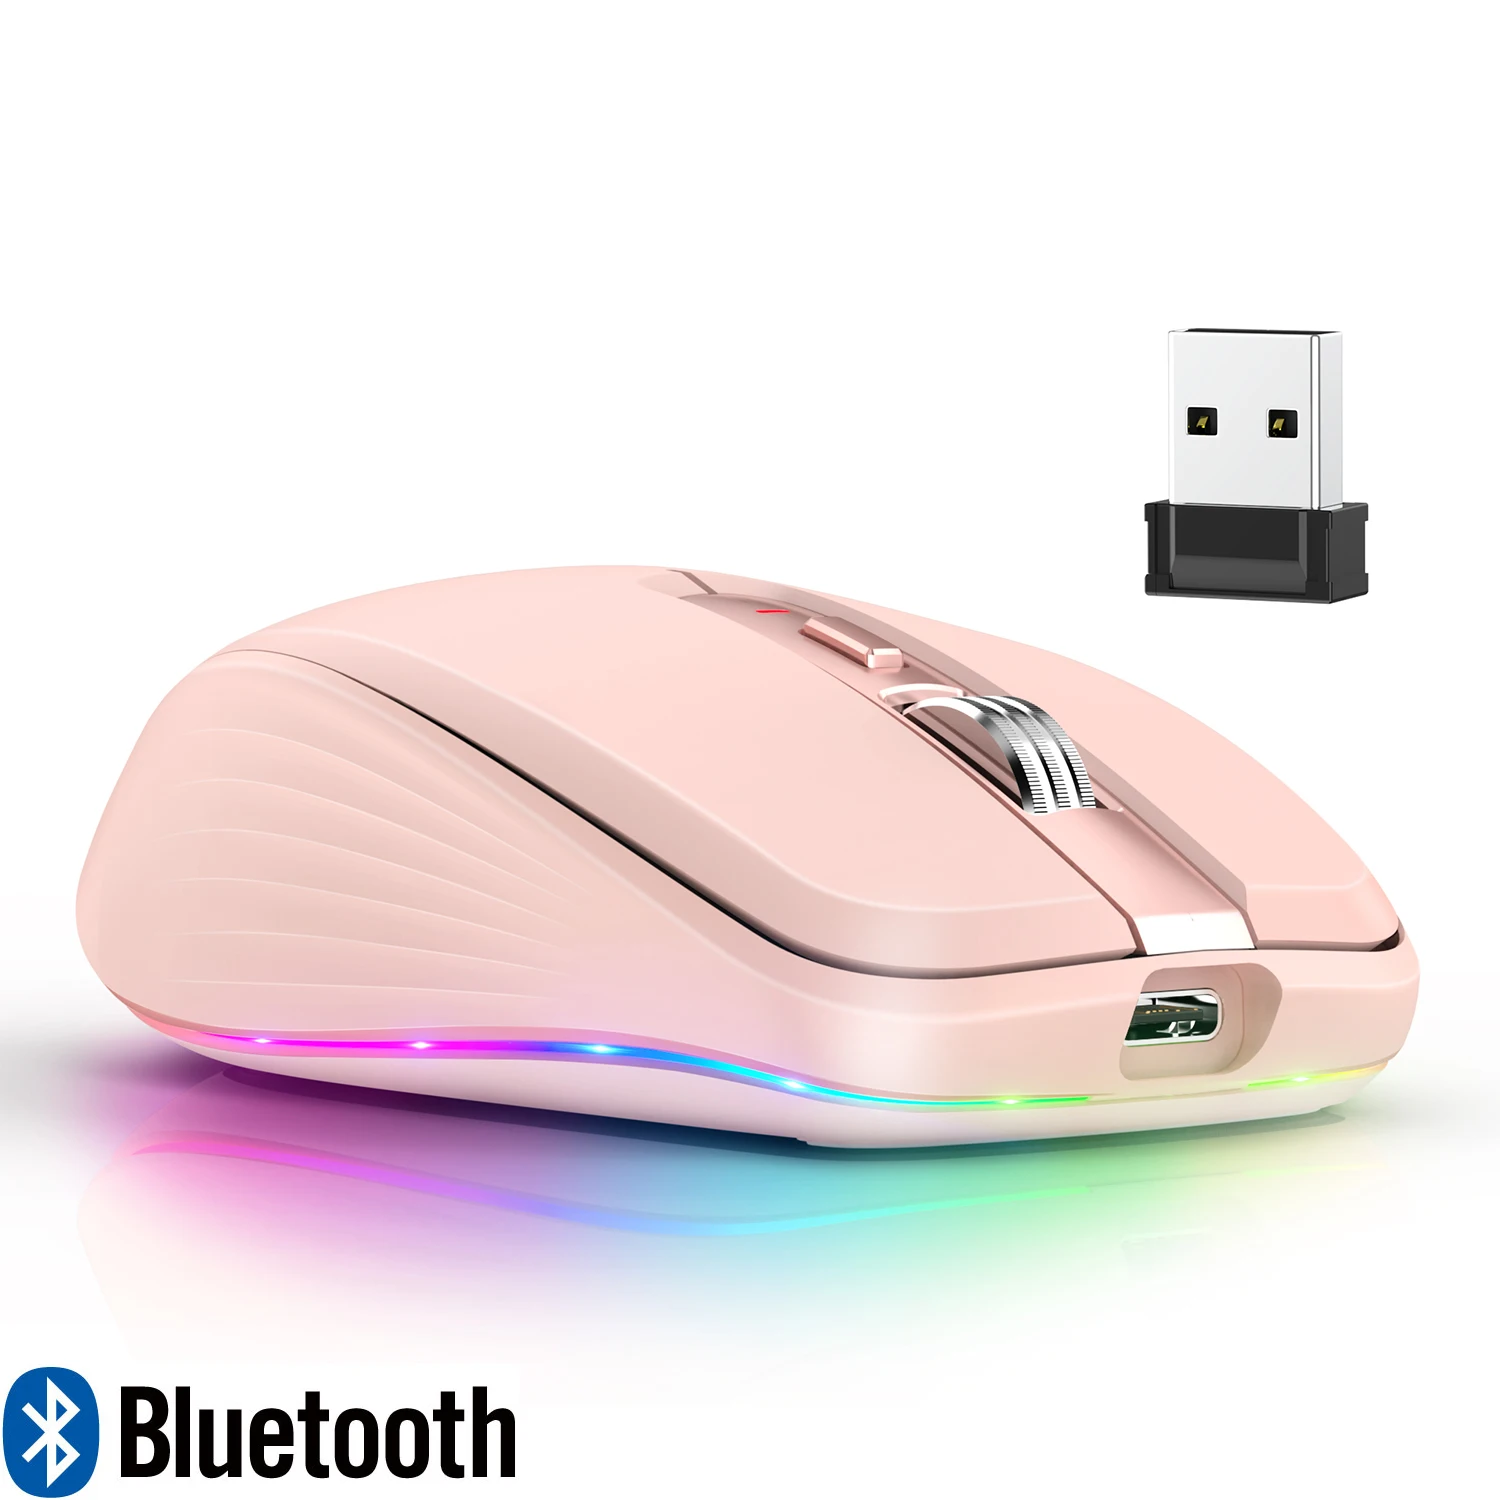 

Dual Mode Rechargeable Wireless Bluetooth Mouse 2.4G USB RGB Mute Mouse For iPad Windows Mac IOS Android Laptop Tablet Phone PC